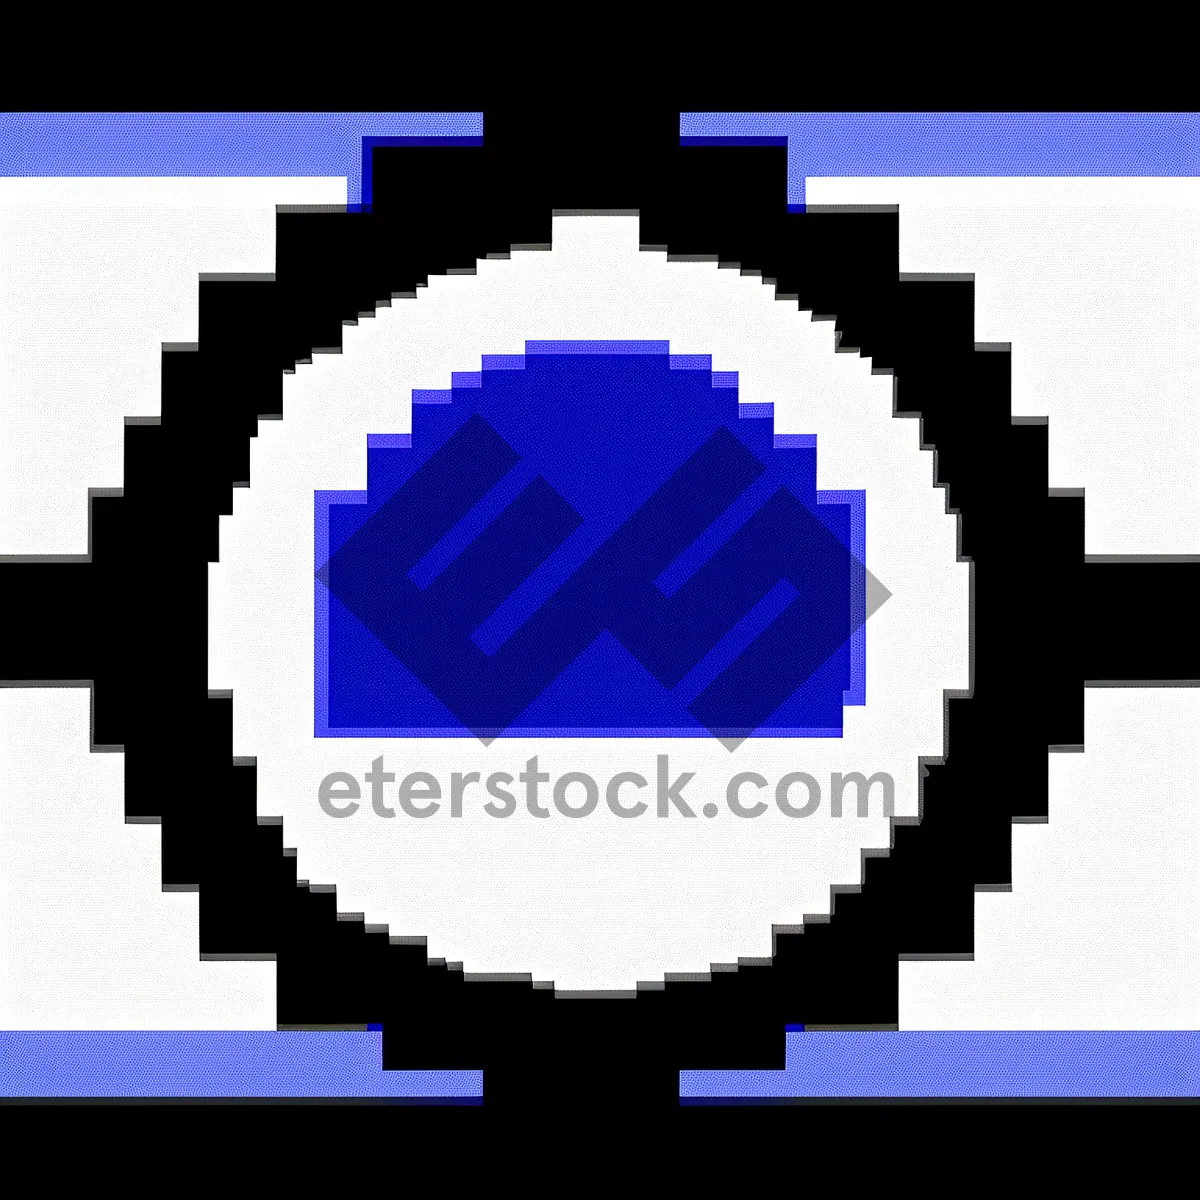 Picture of Sleek Gear Design Icon with Artistic Circle Decoration.